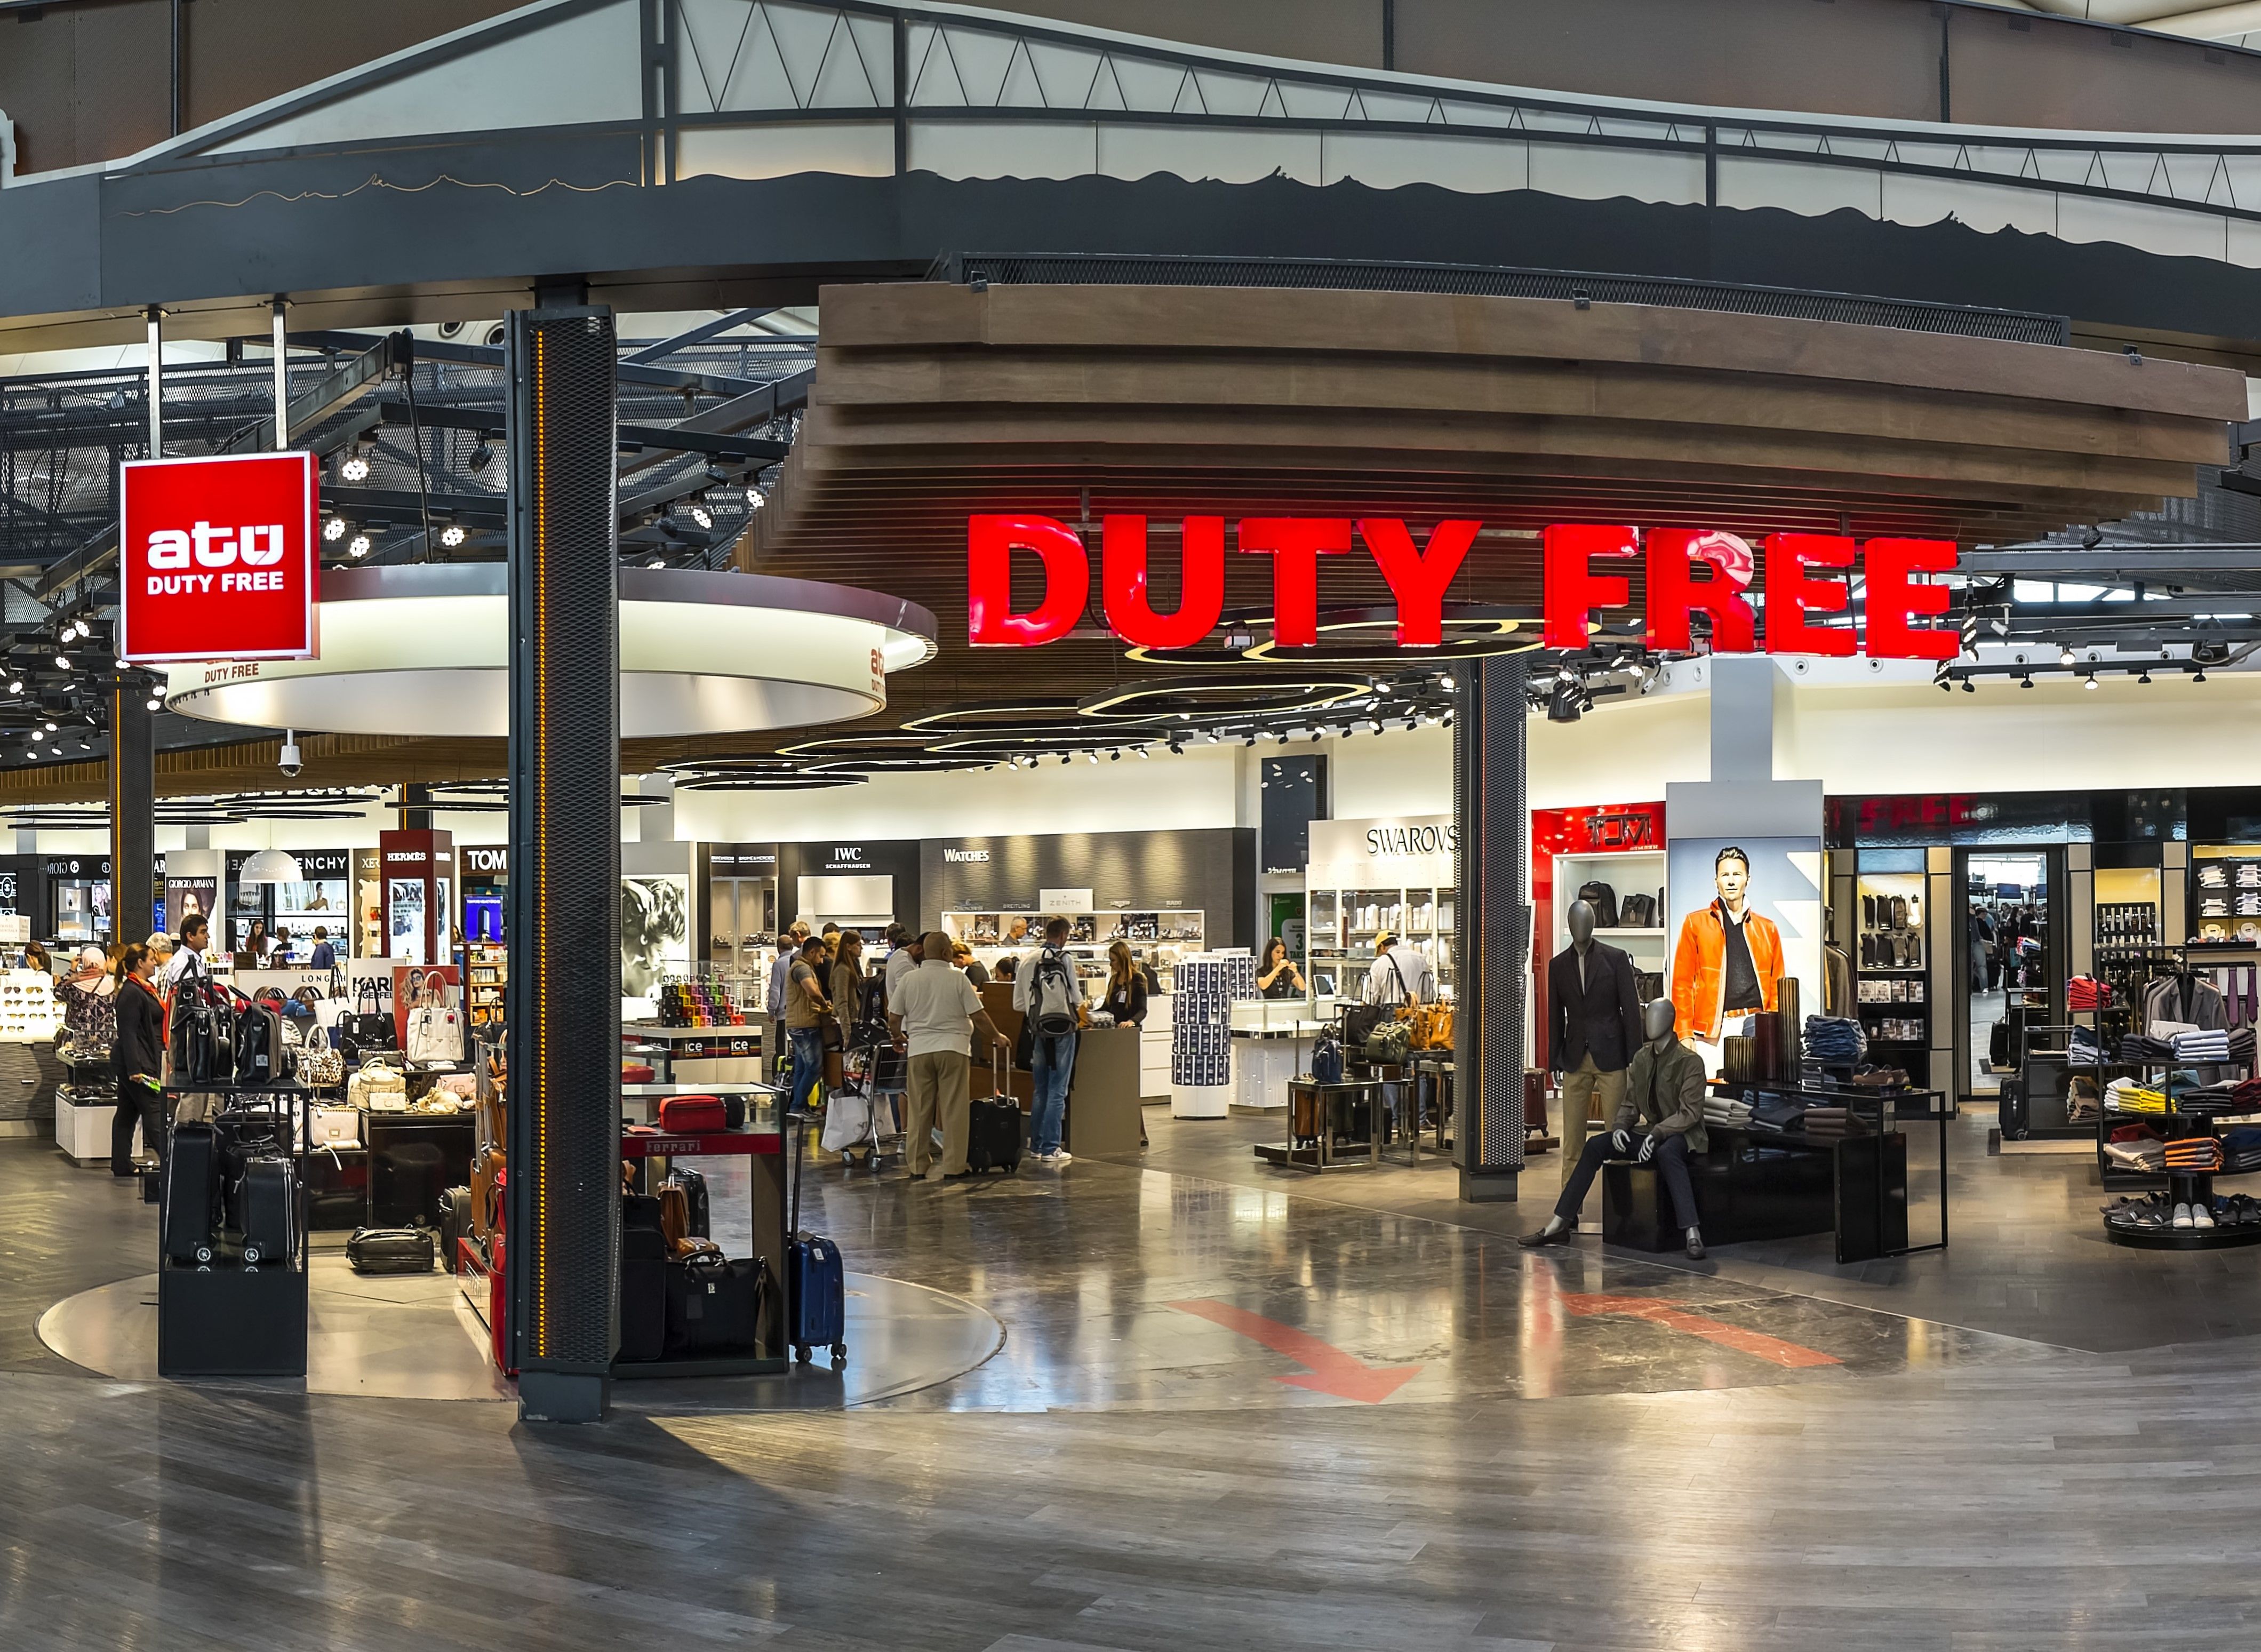 Duty free shopping in an airport